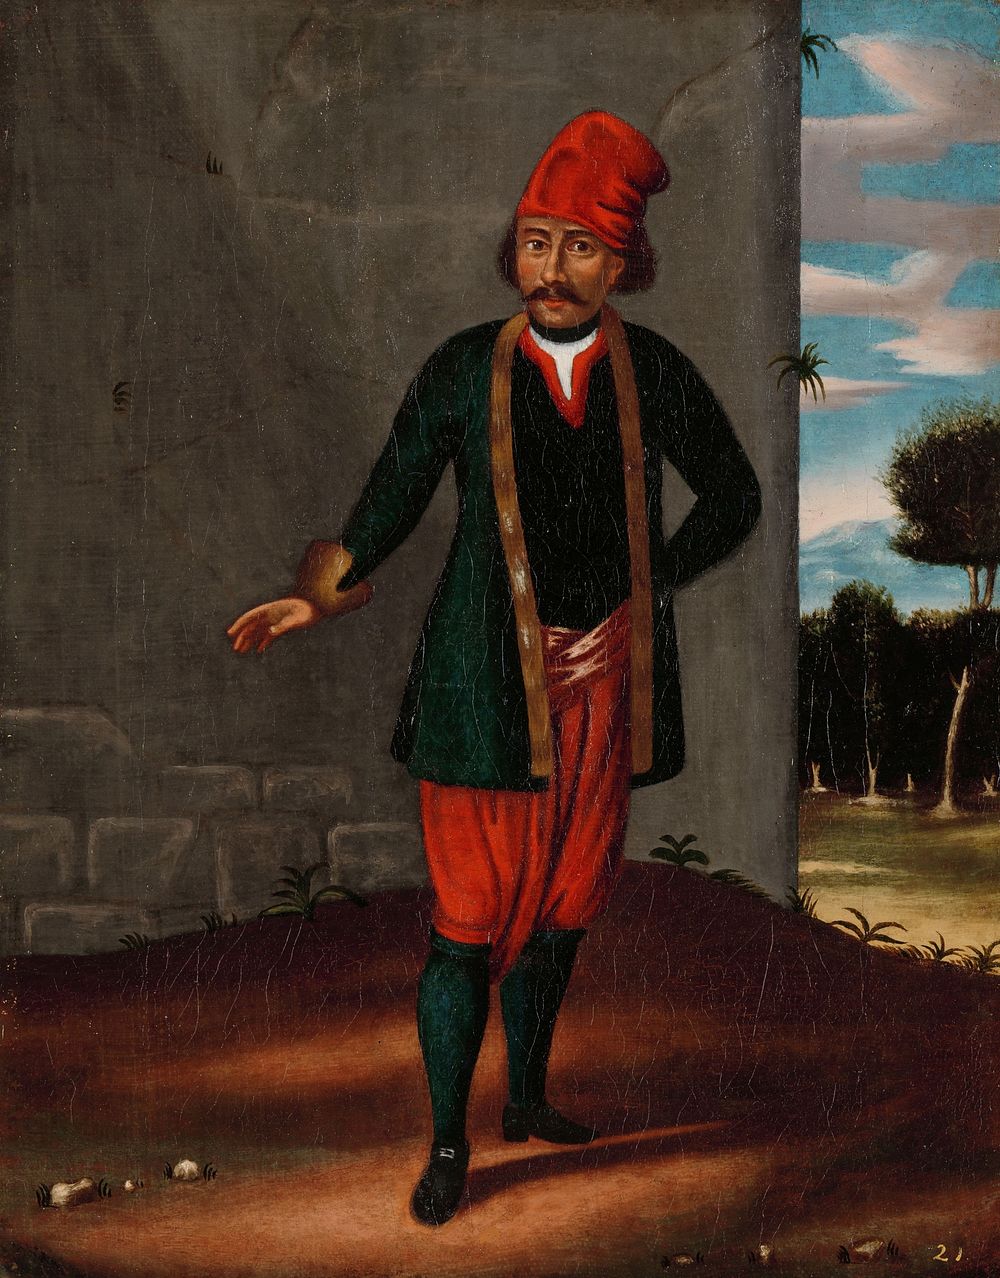 Man from the Island of Tinos (1700 - 1737) by Jean Baptiste Vanmour